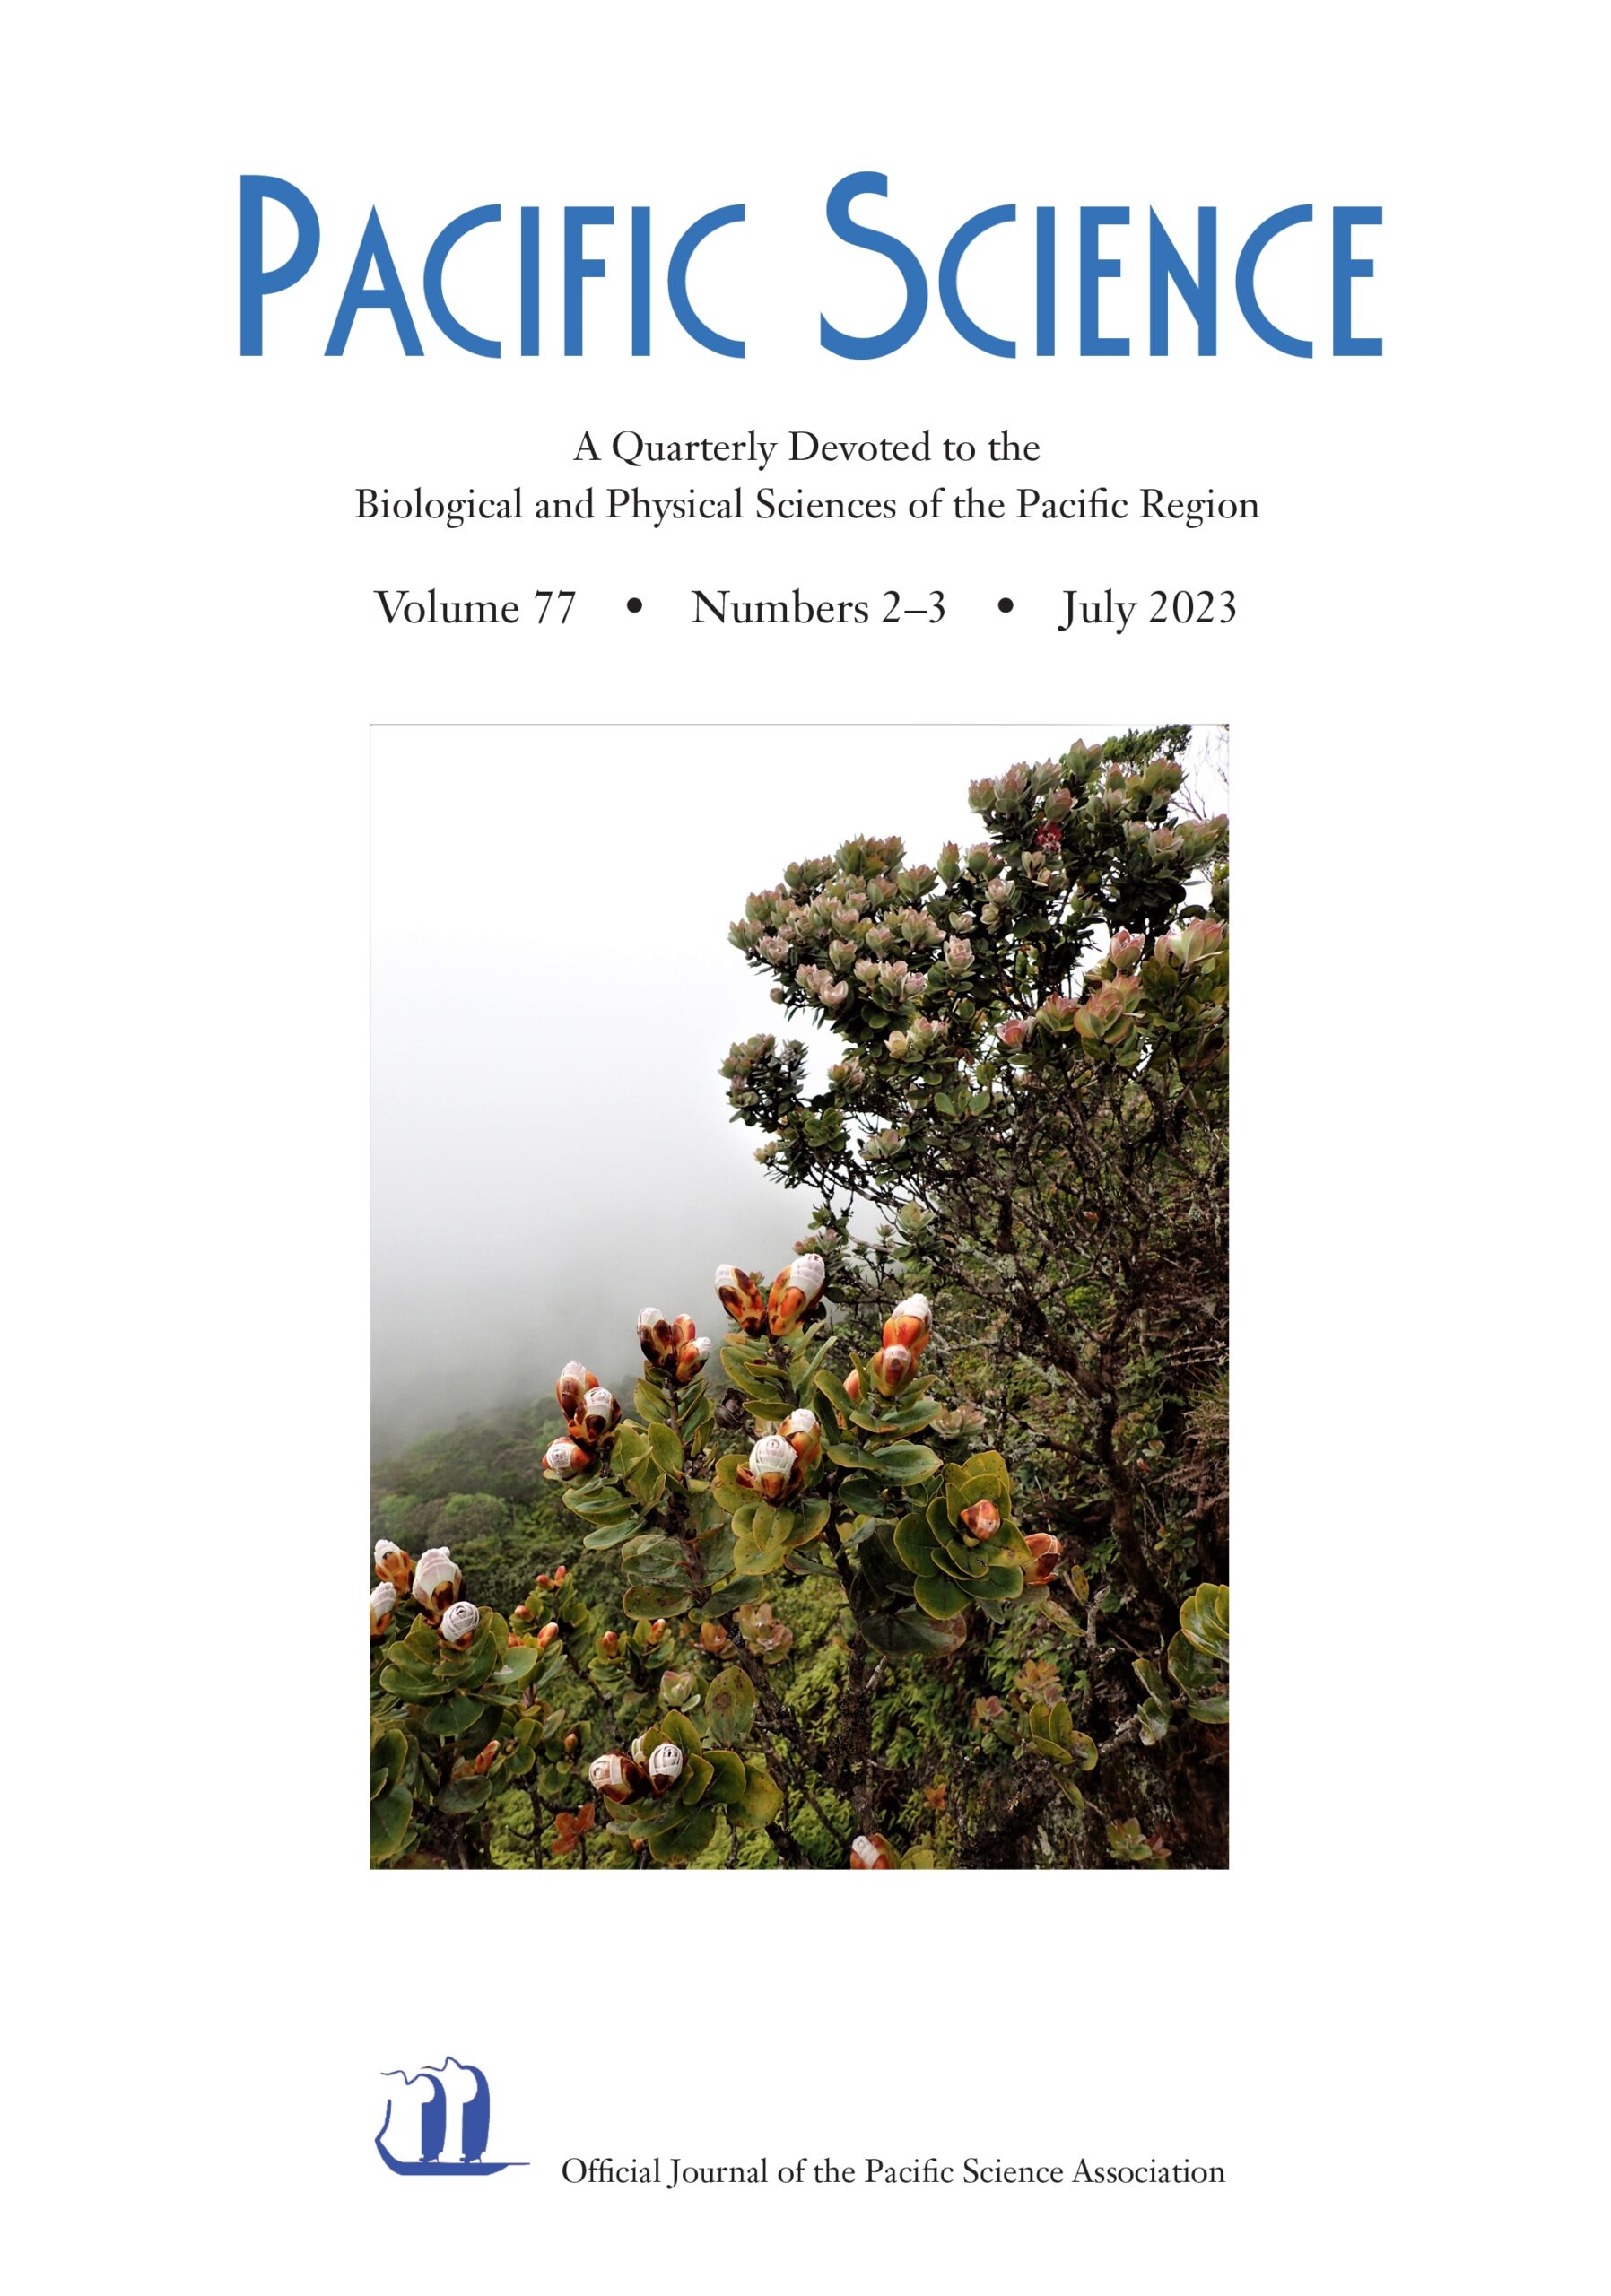 Pacific Science: A Quarterly Devoted to the Biological and Physical Sciences of the Pacific Region